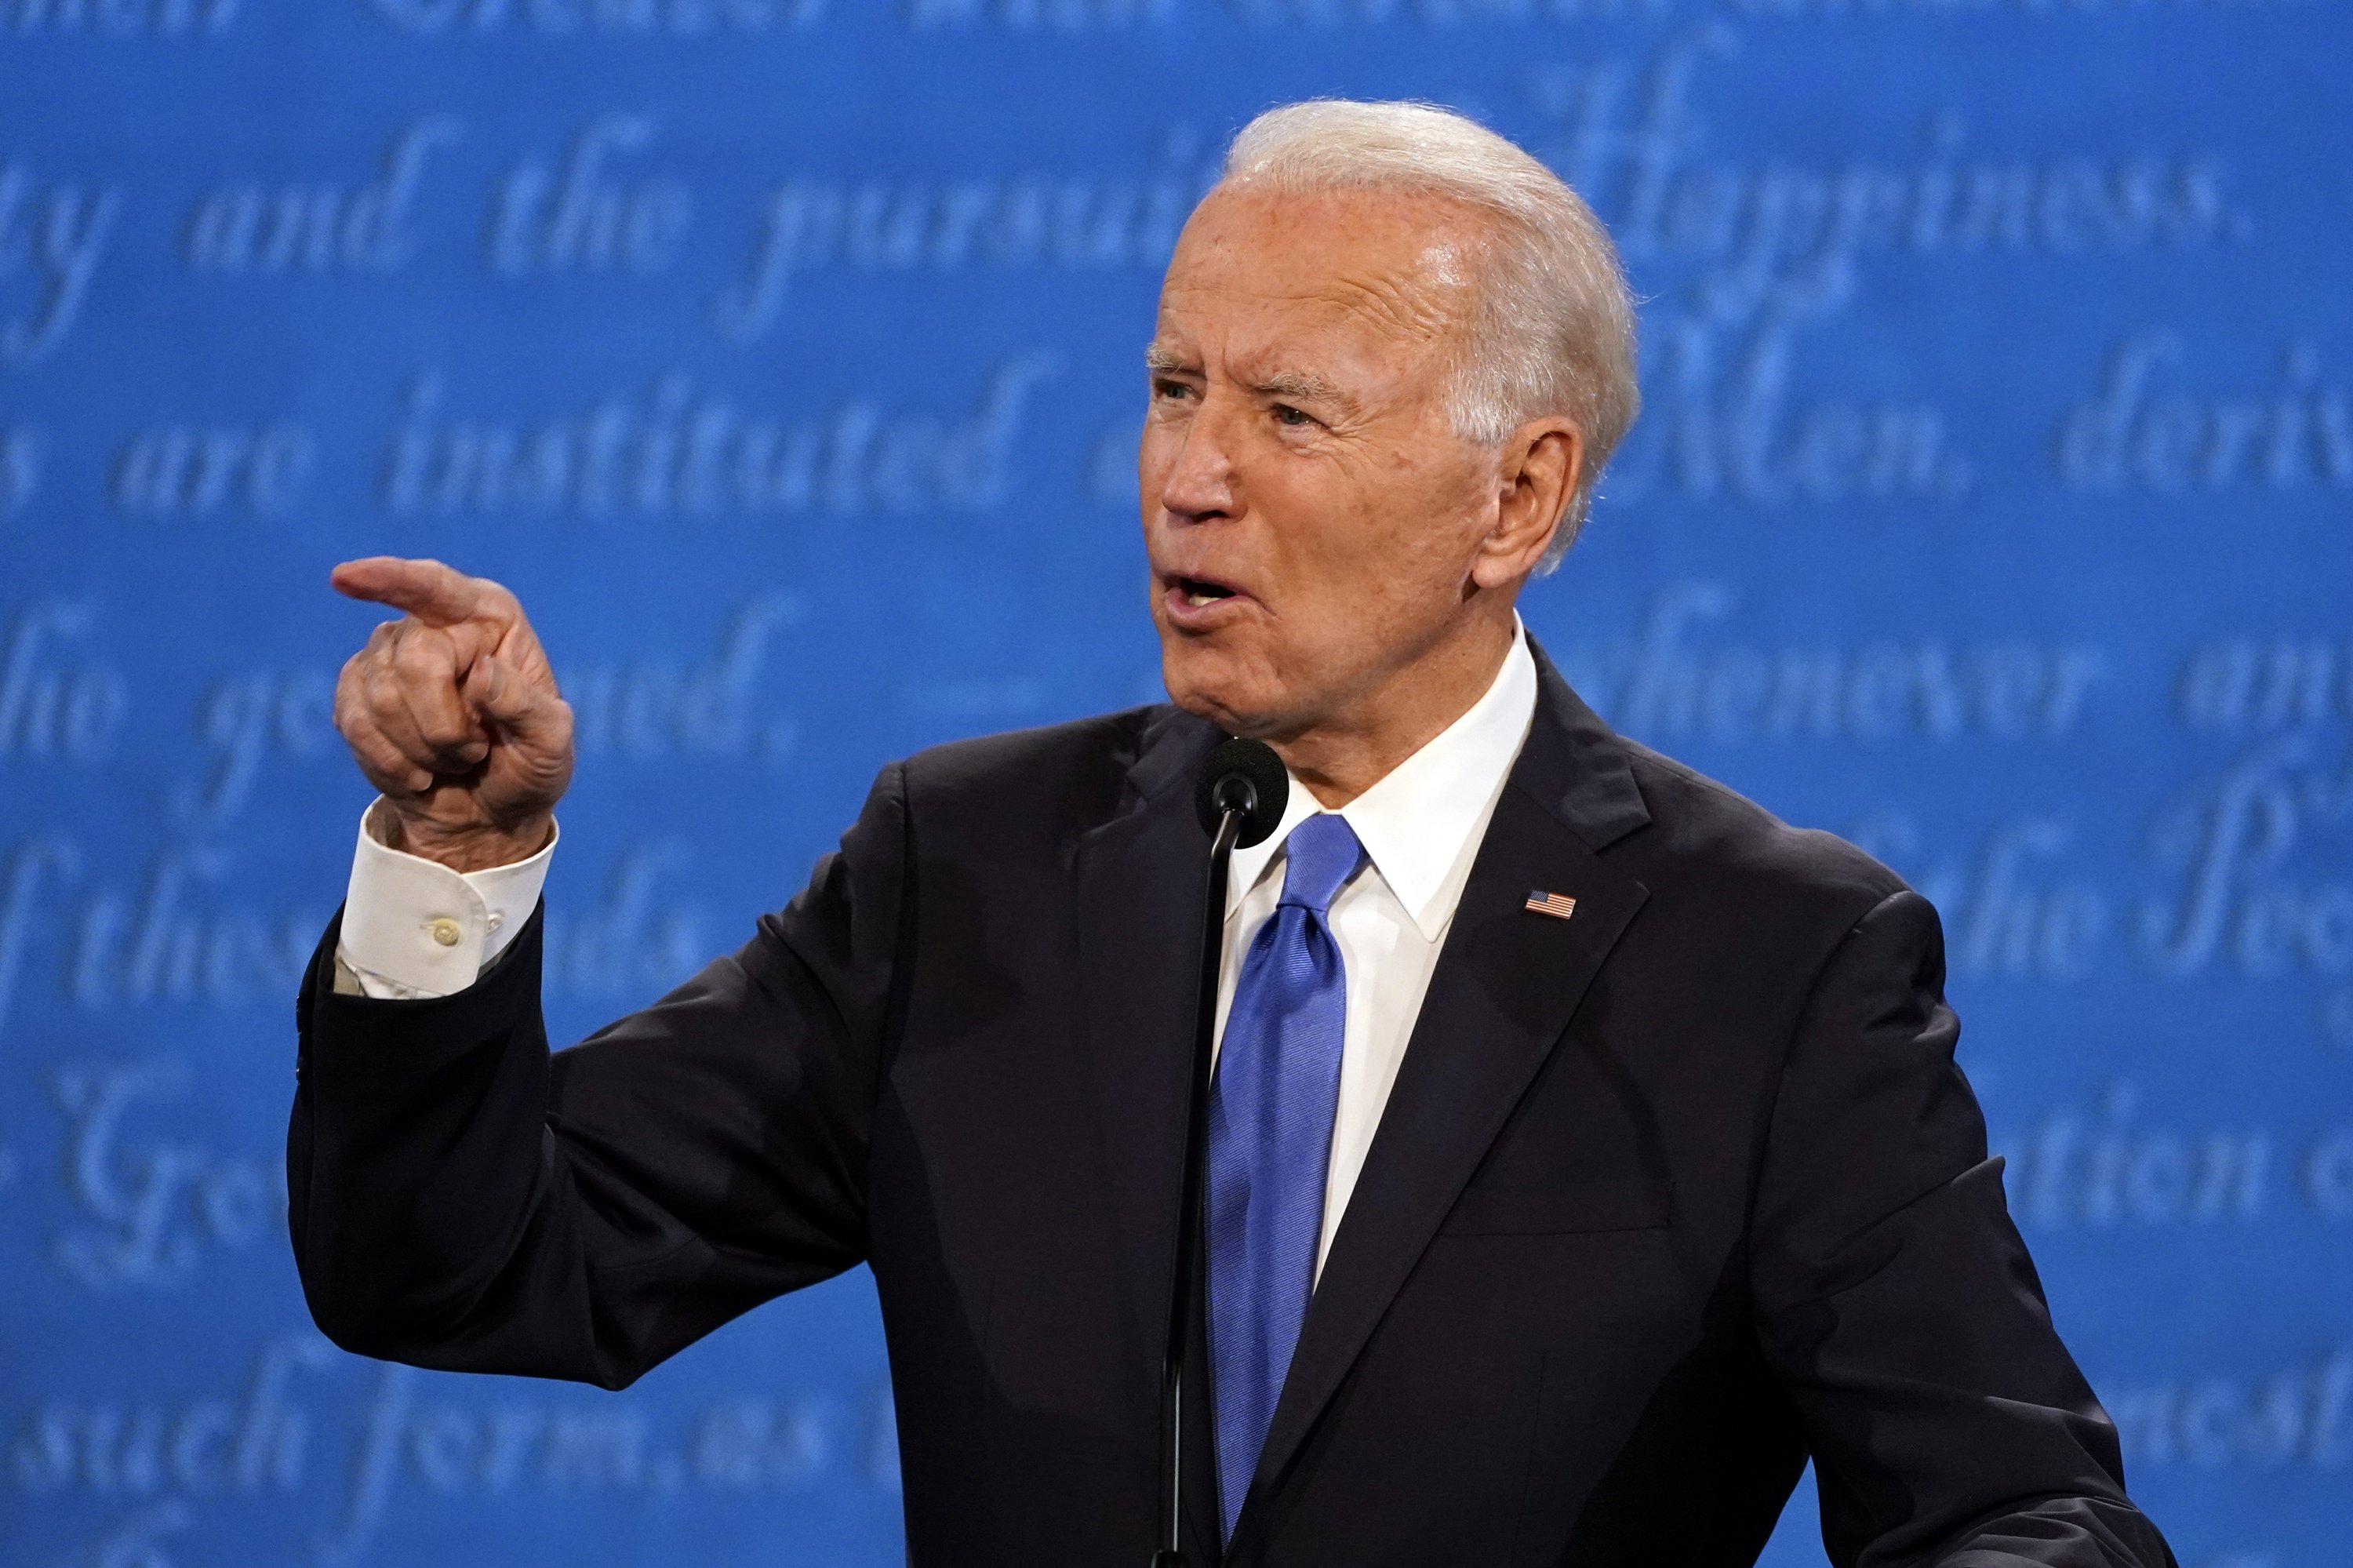 Biden calls for 'transition' from oil, GOP sees opening